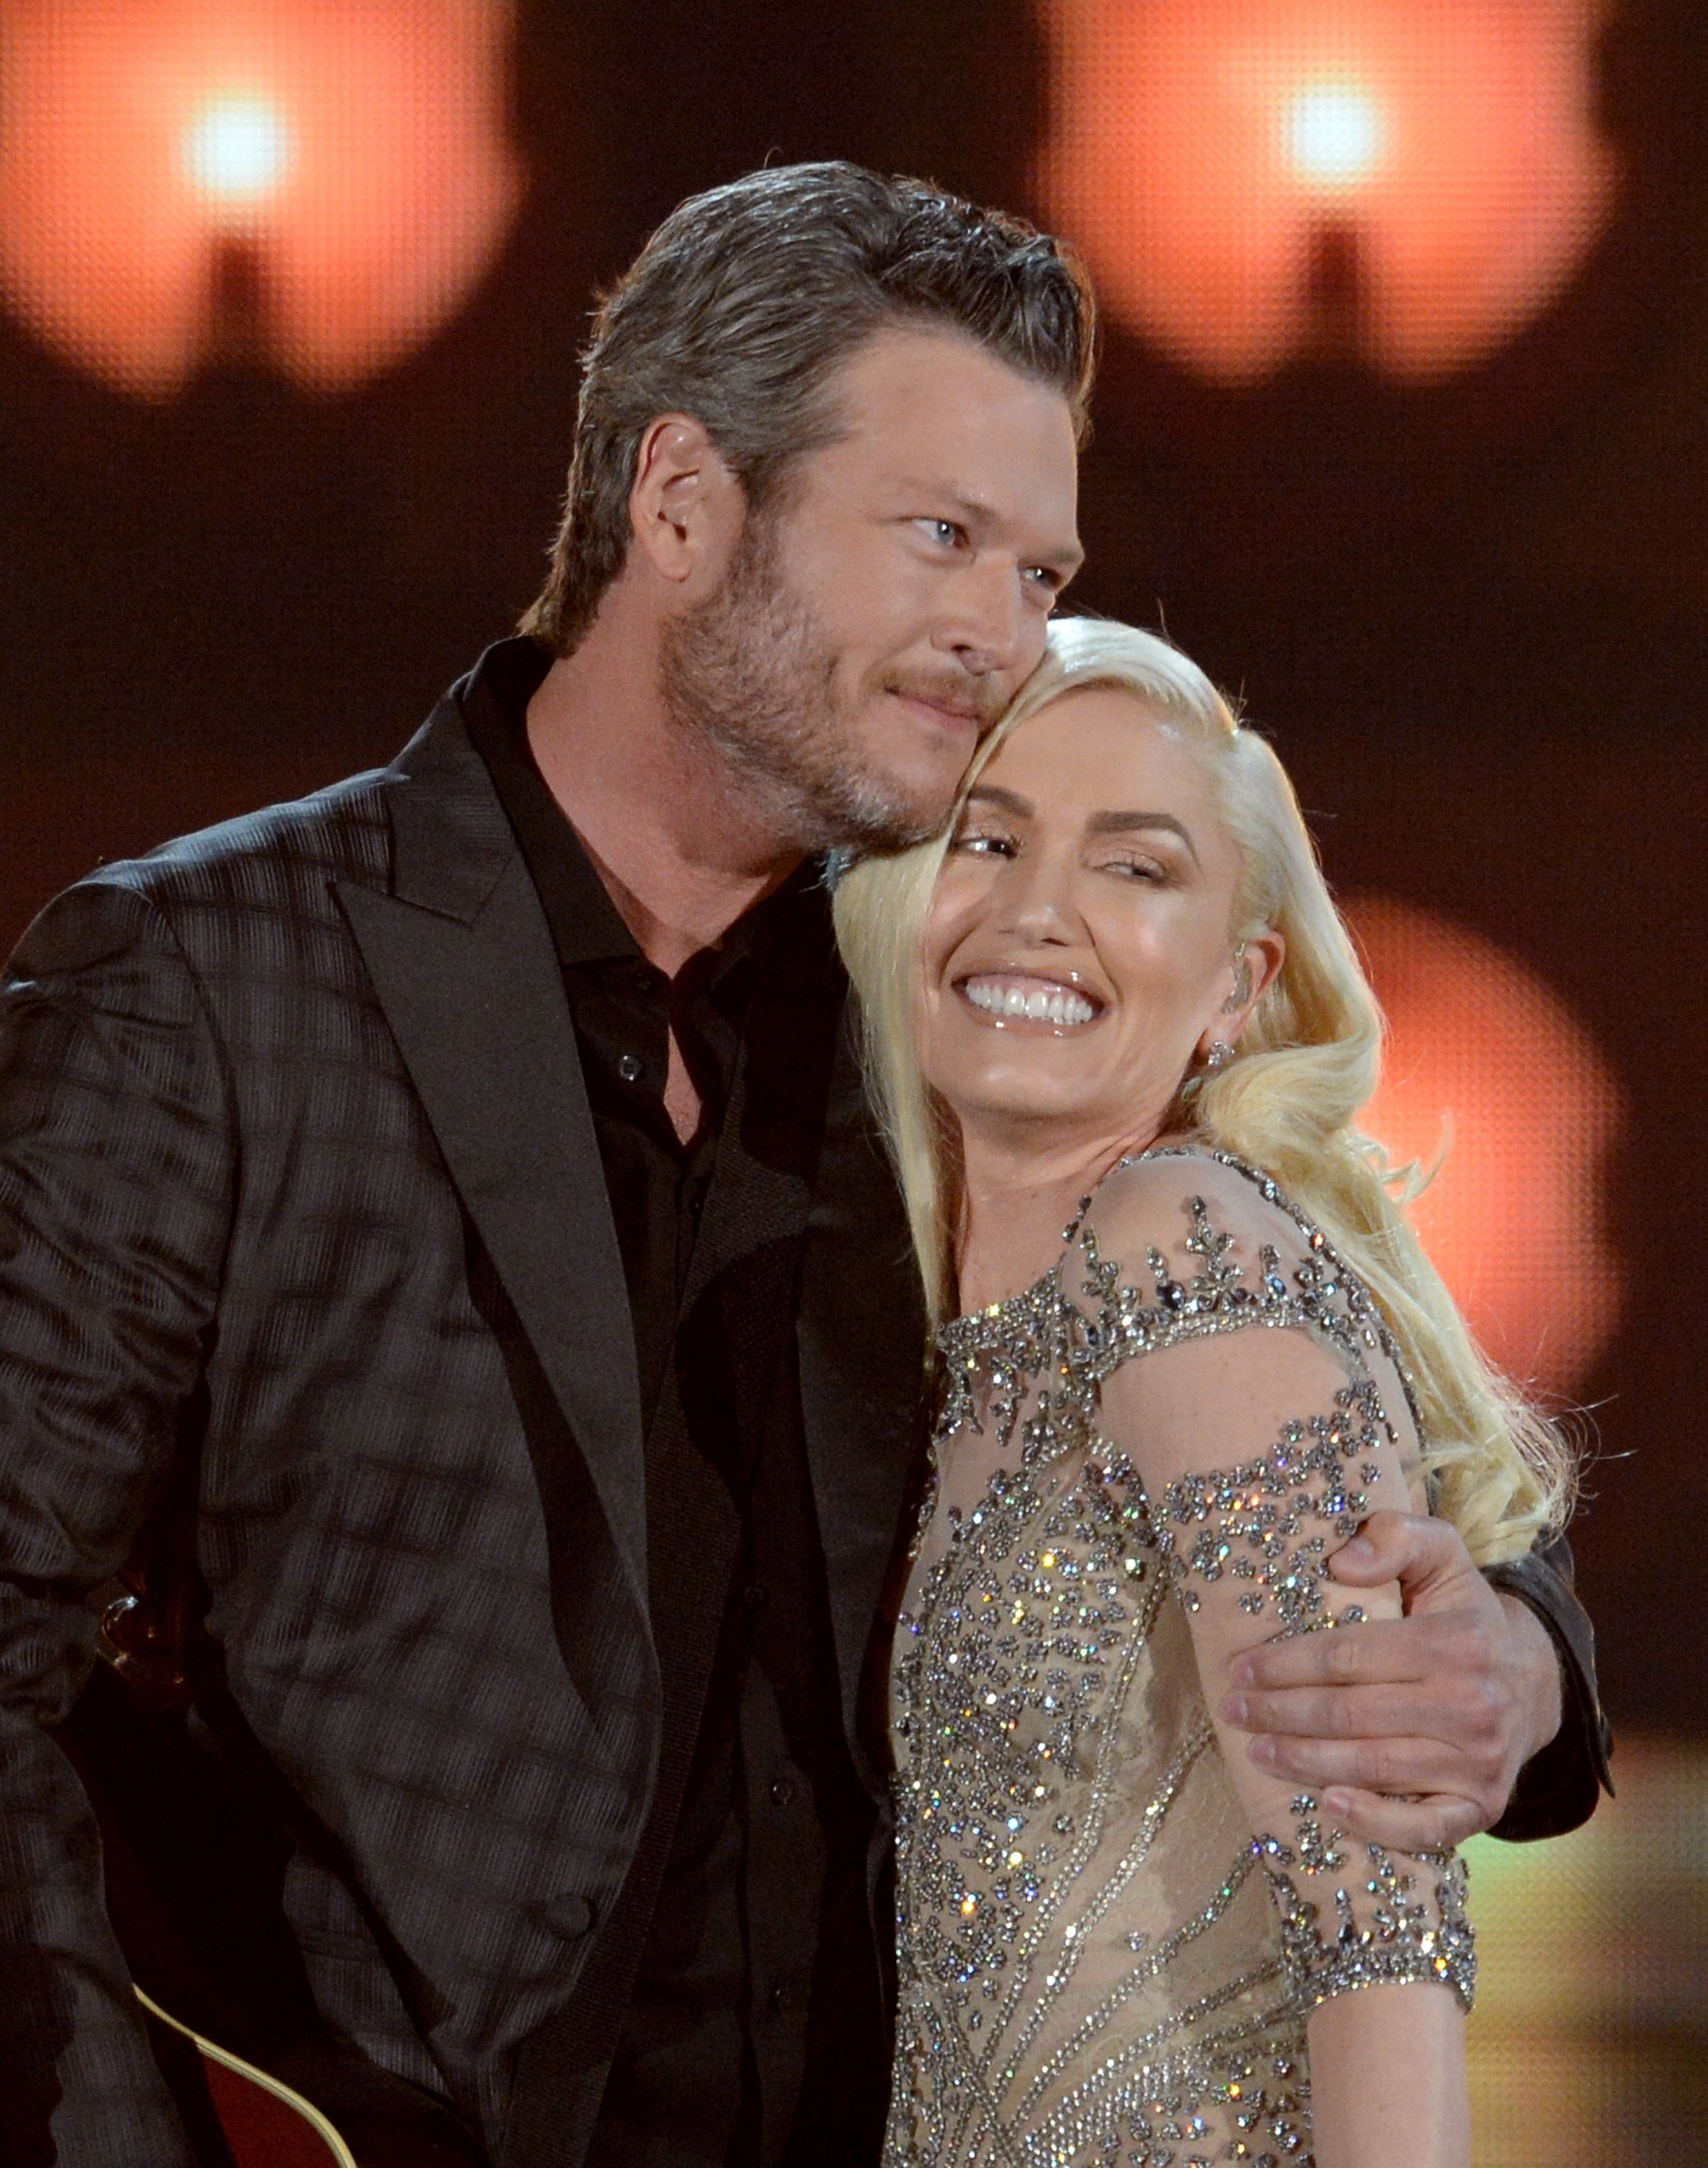 Blake Shelton and Gwen Stefani perform onstage during the 2016 Billboard Music Awards on May 22, 2016 in Las Vegas, Nevada. | Source: Getty Images.